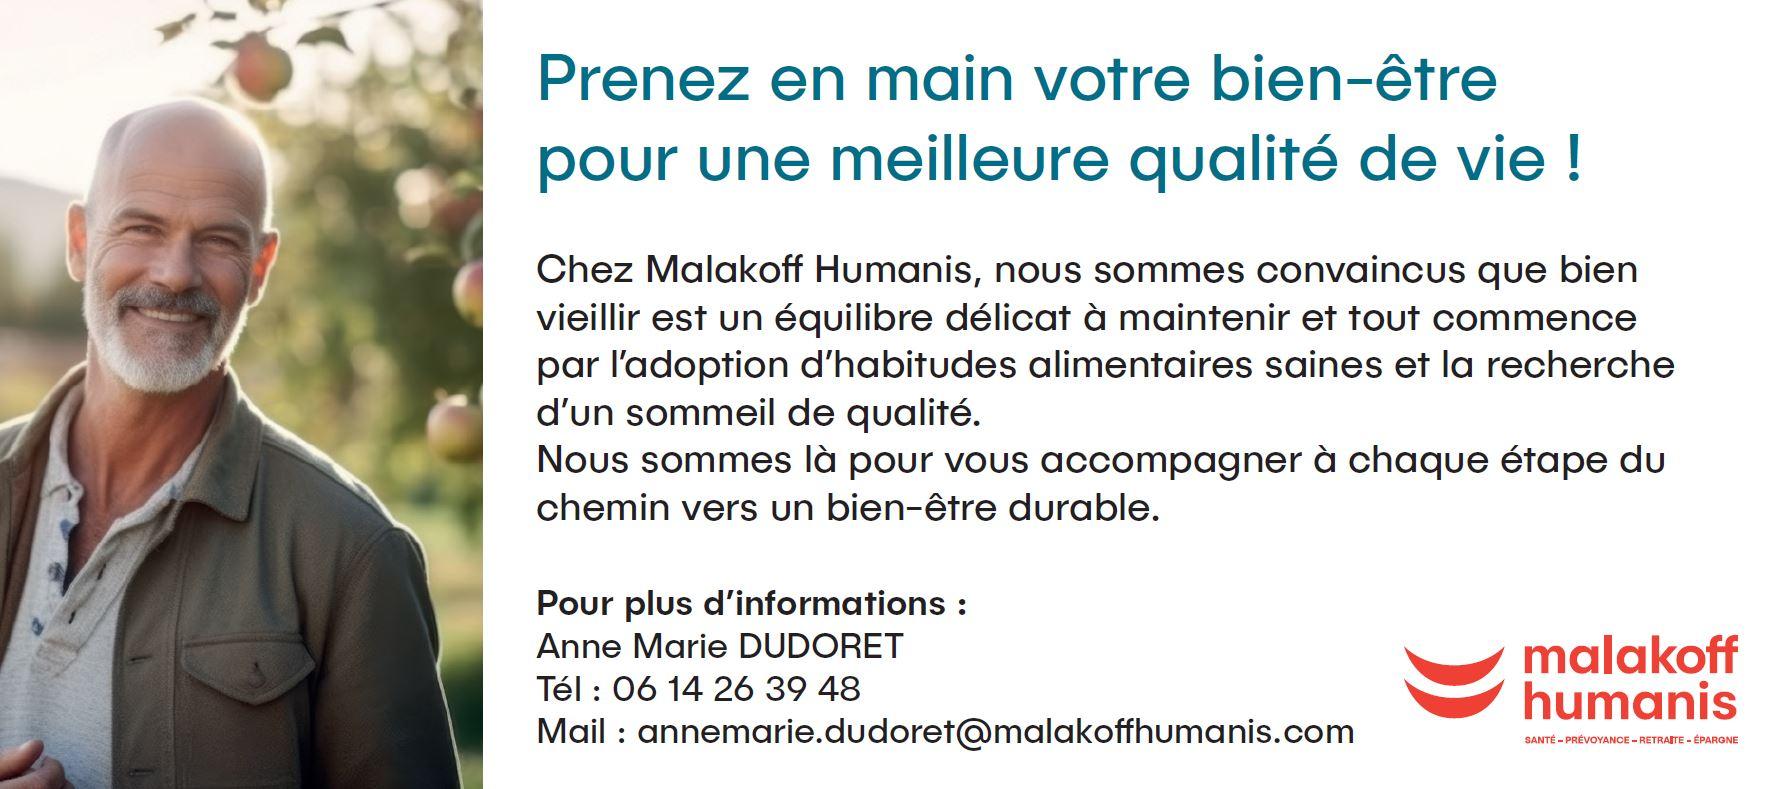 Malkoff humanis